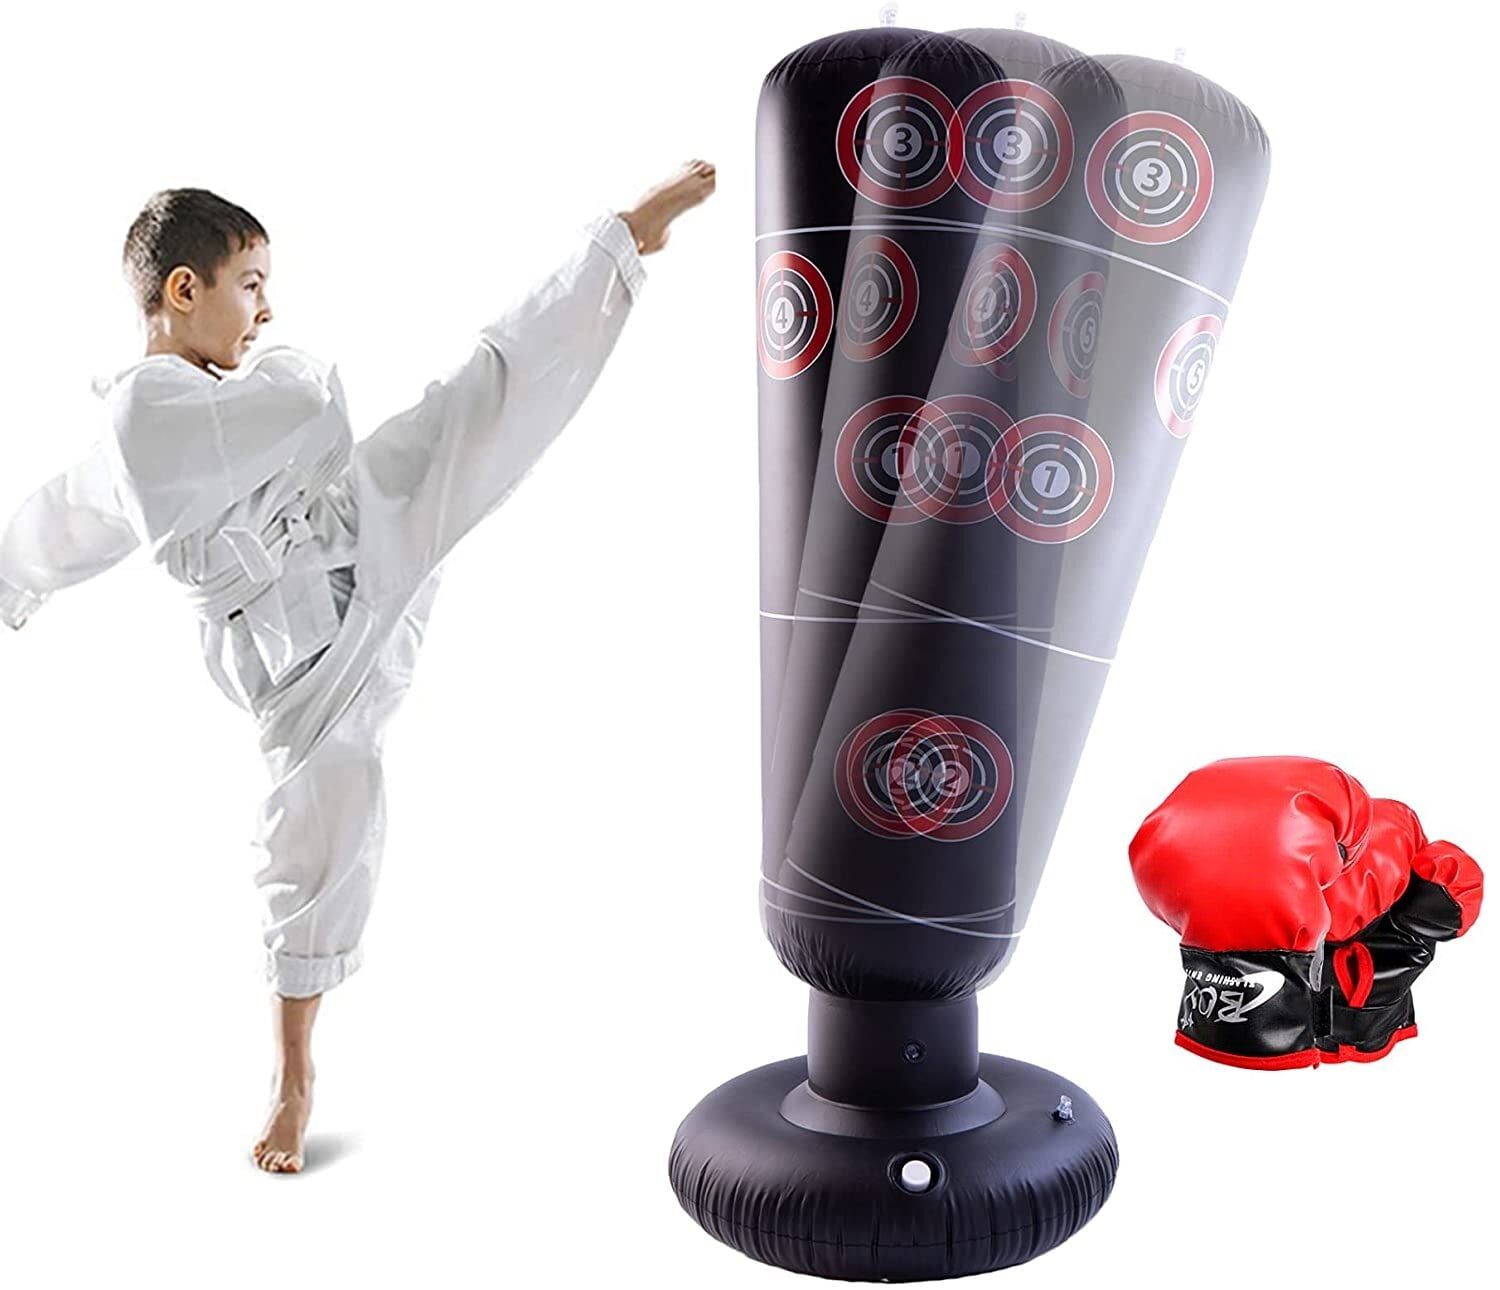 Inflatable Punching Bag Tower Pillow For Stress or Martial Arts Global Gizmos 